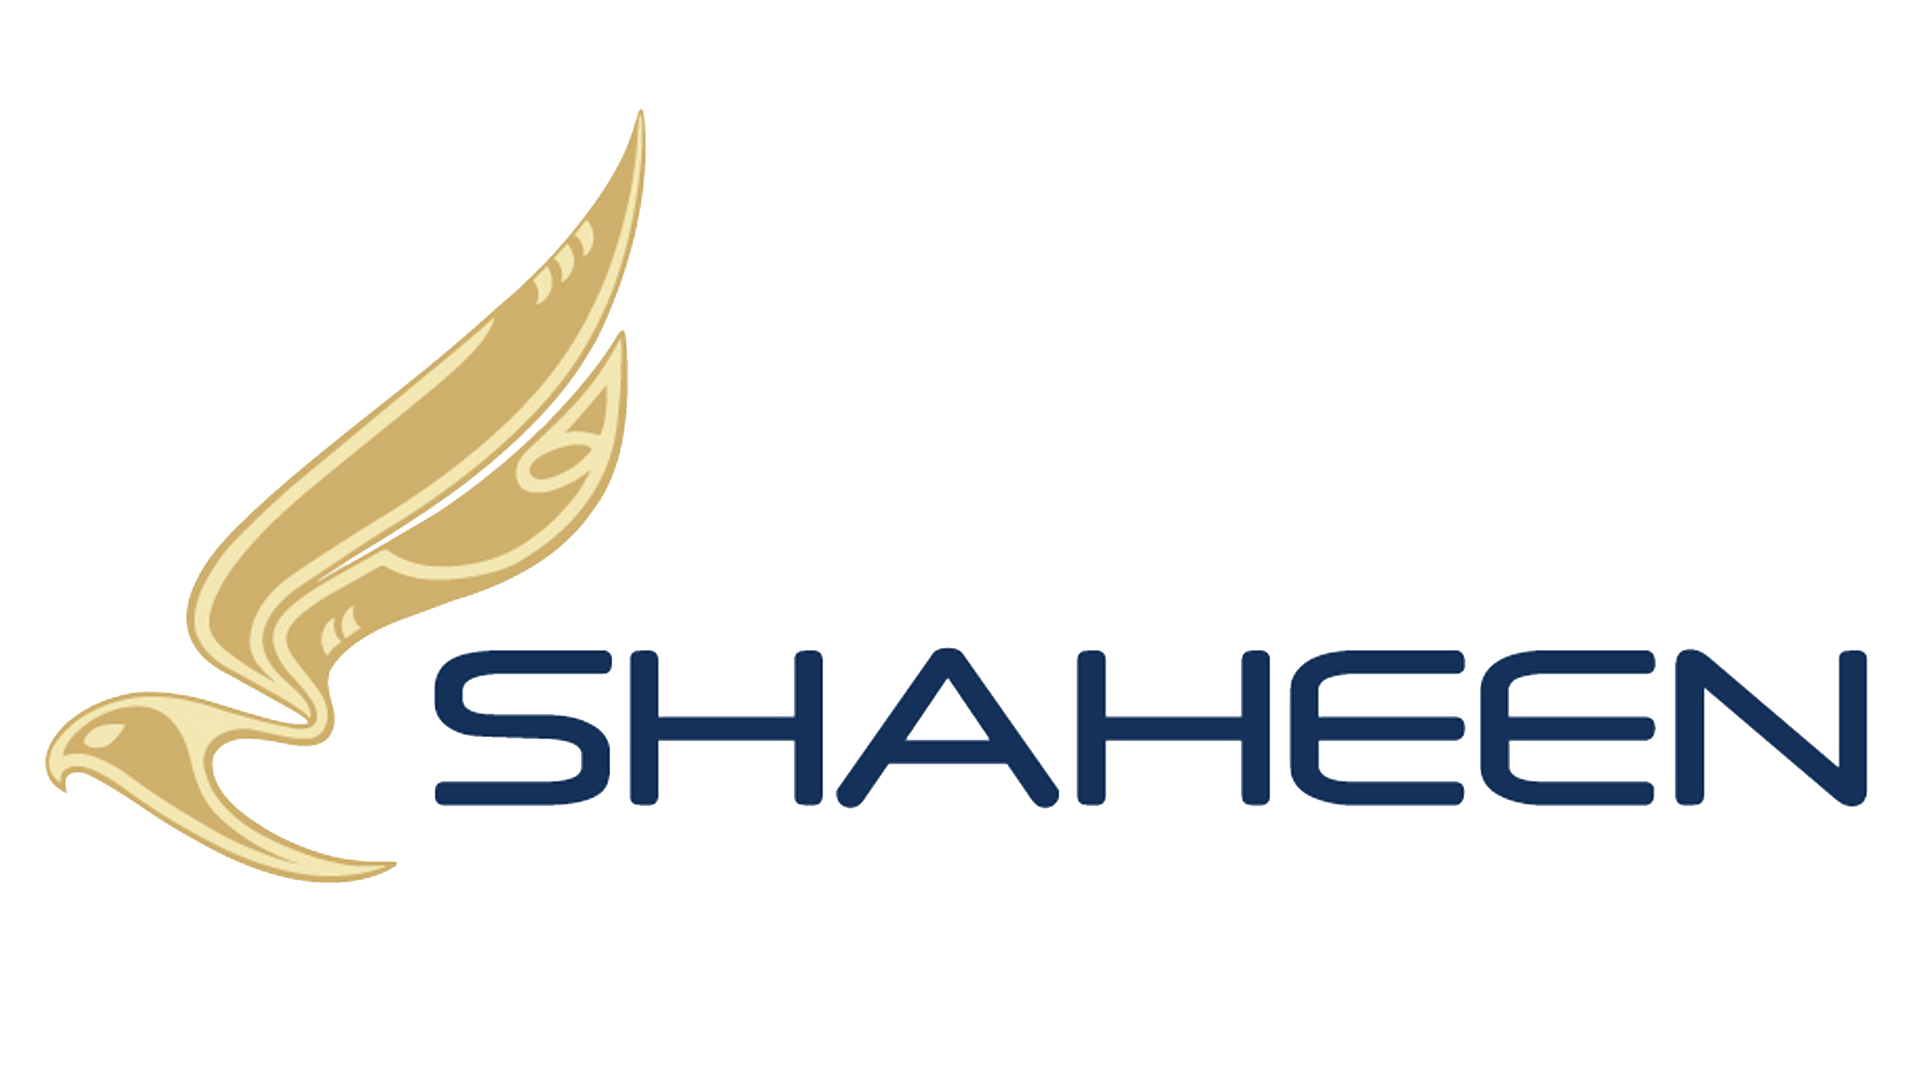 Shaheen Air - Norsk Hydro , HD Wallpaper & Backgrounds